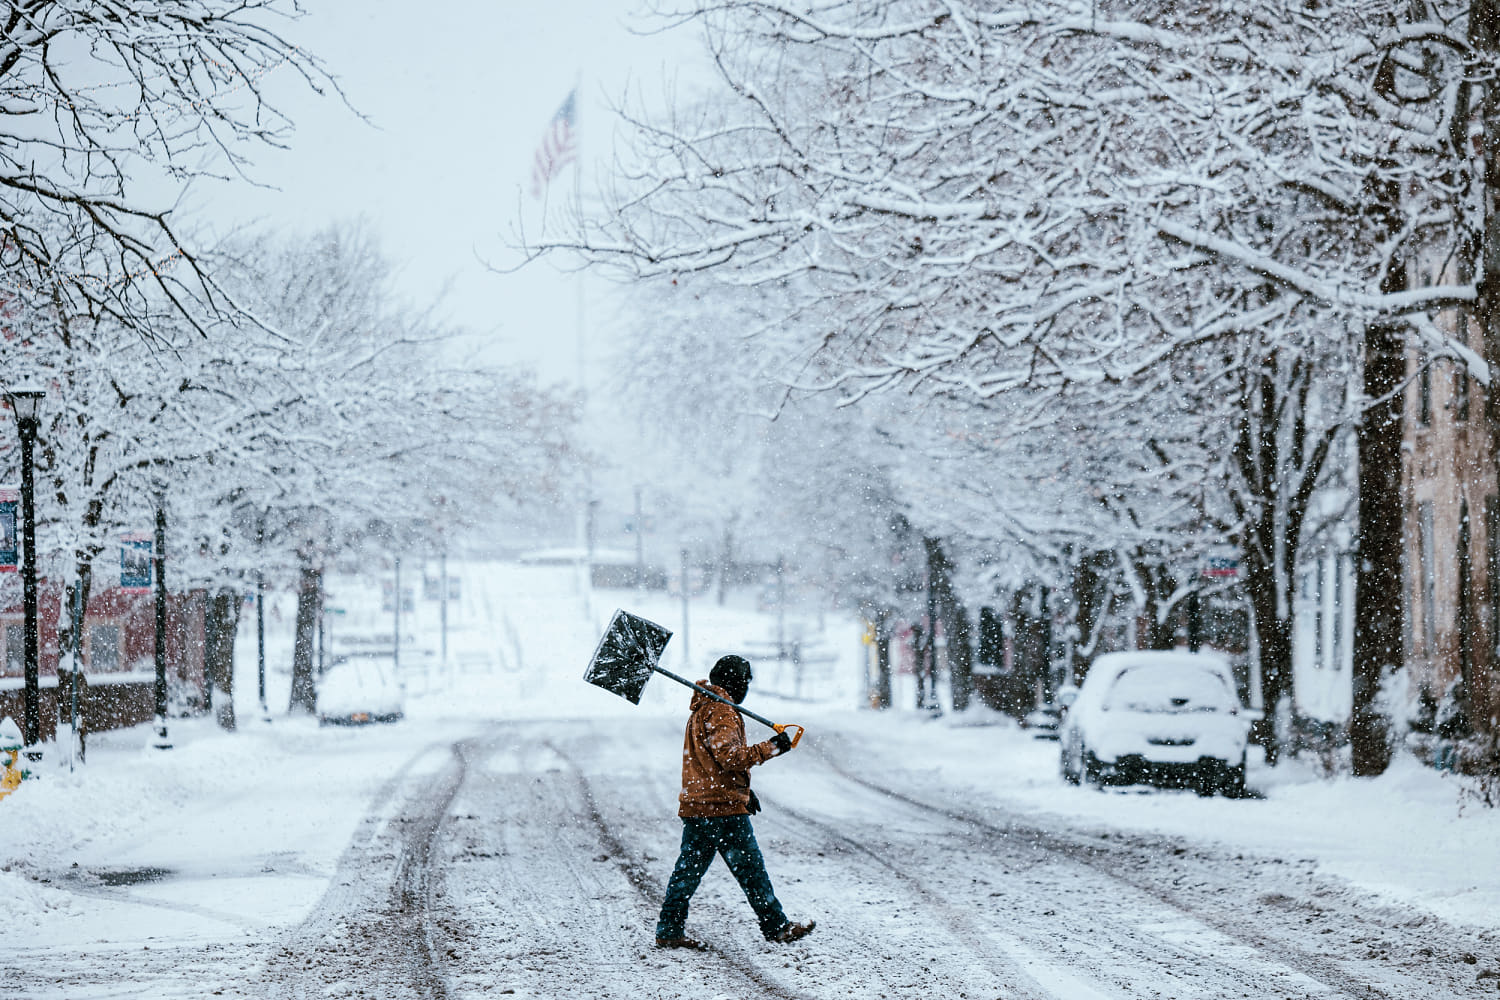 Winter storms dump snow on both U.S. coasts as icy roads make for hazardous travel 